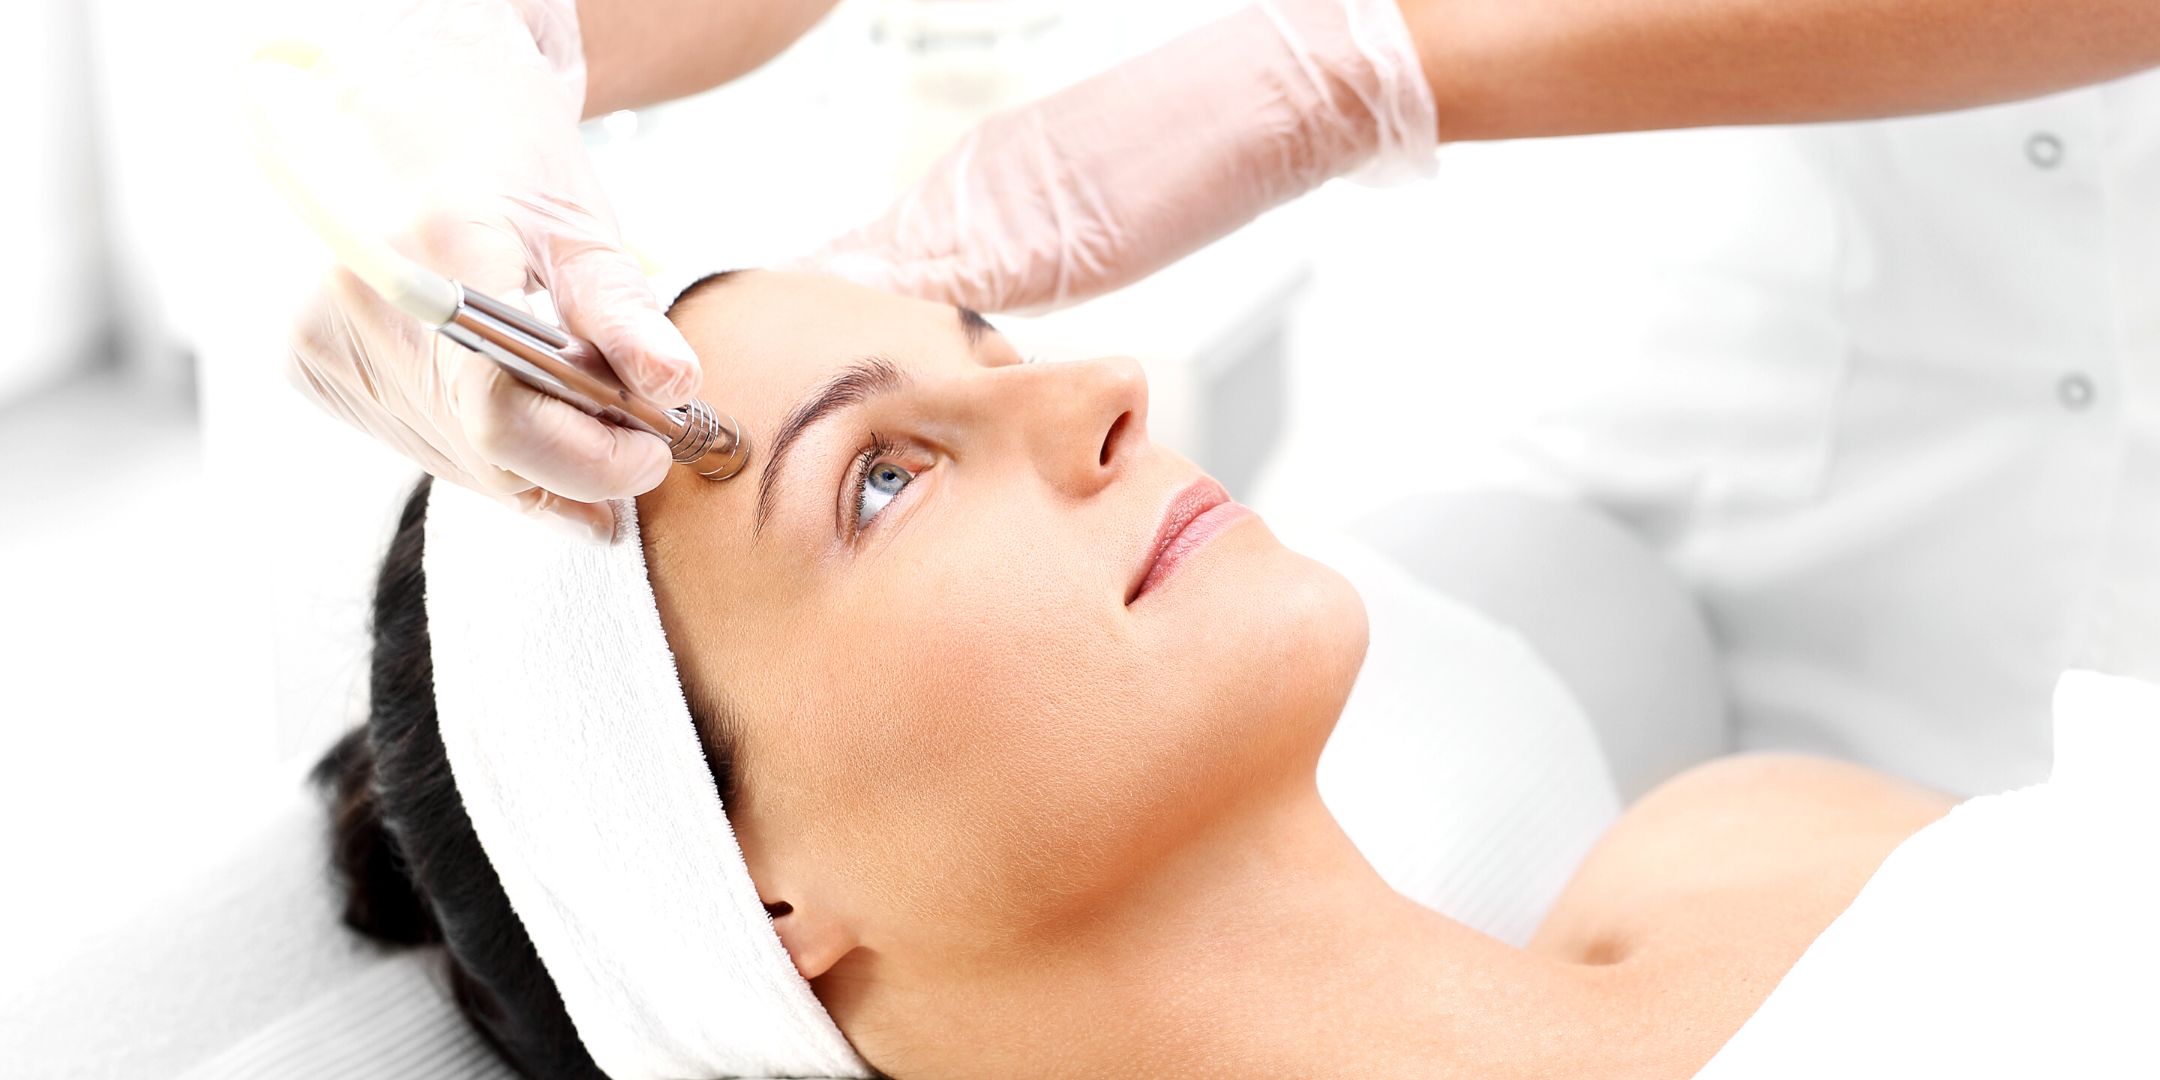 Does Hydro Dermabrasion Hurt?